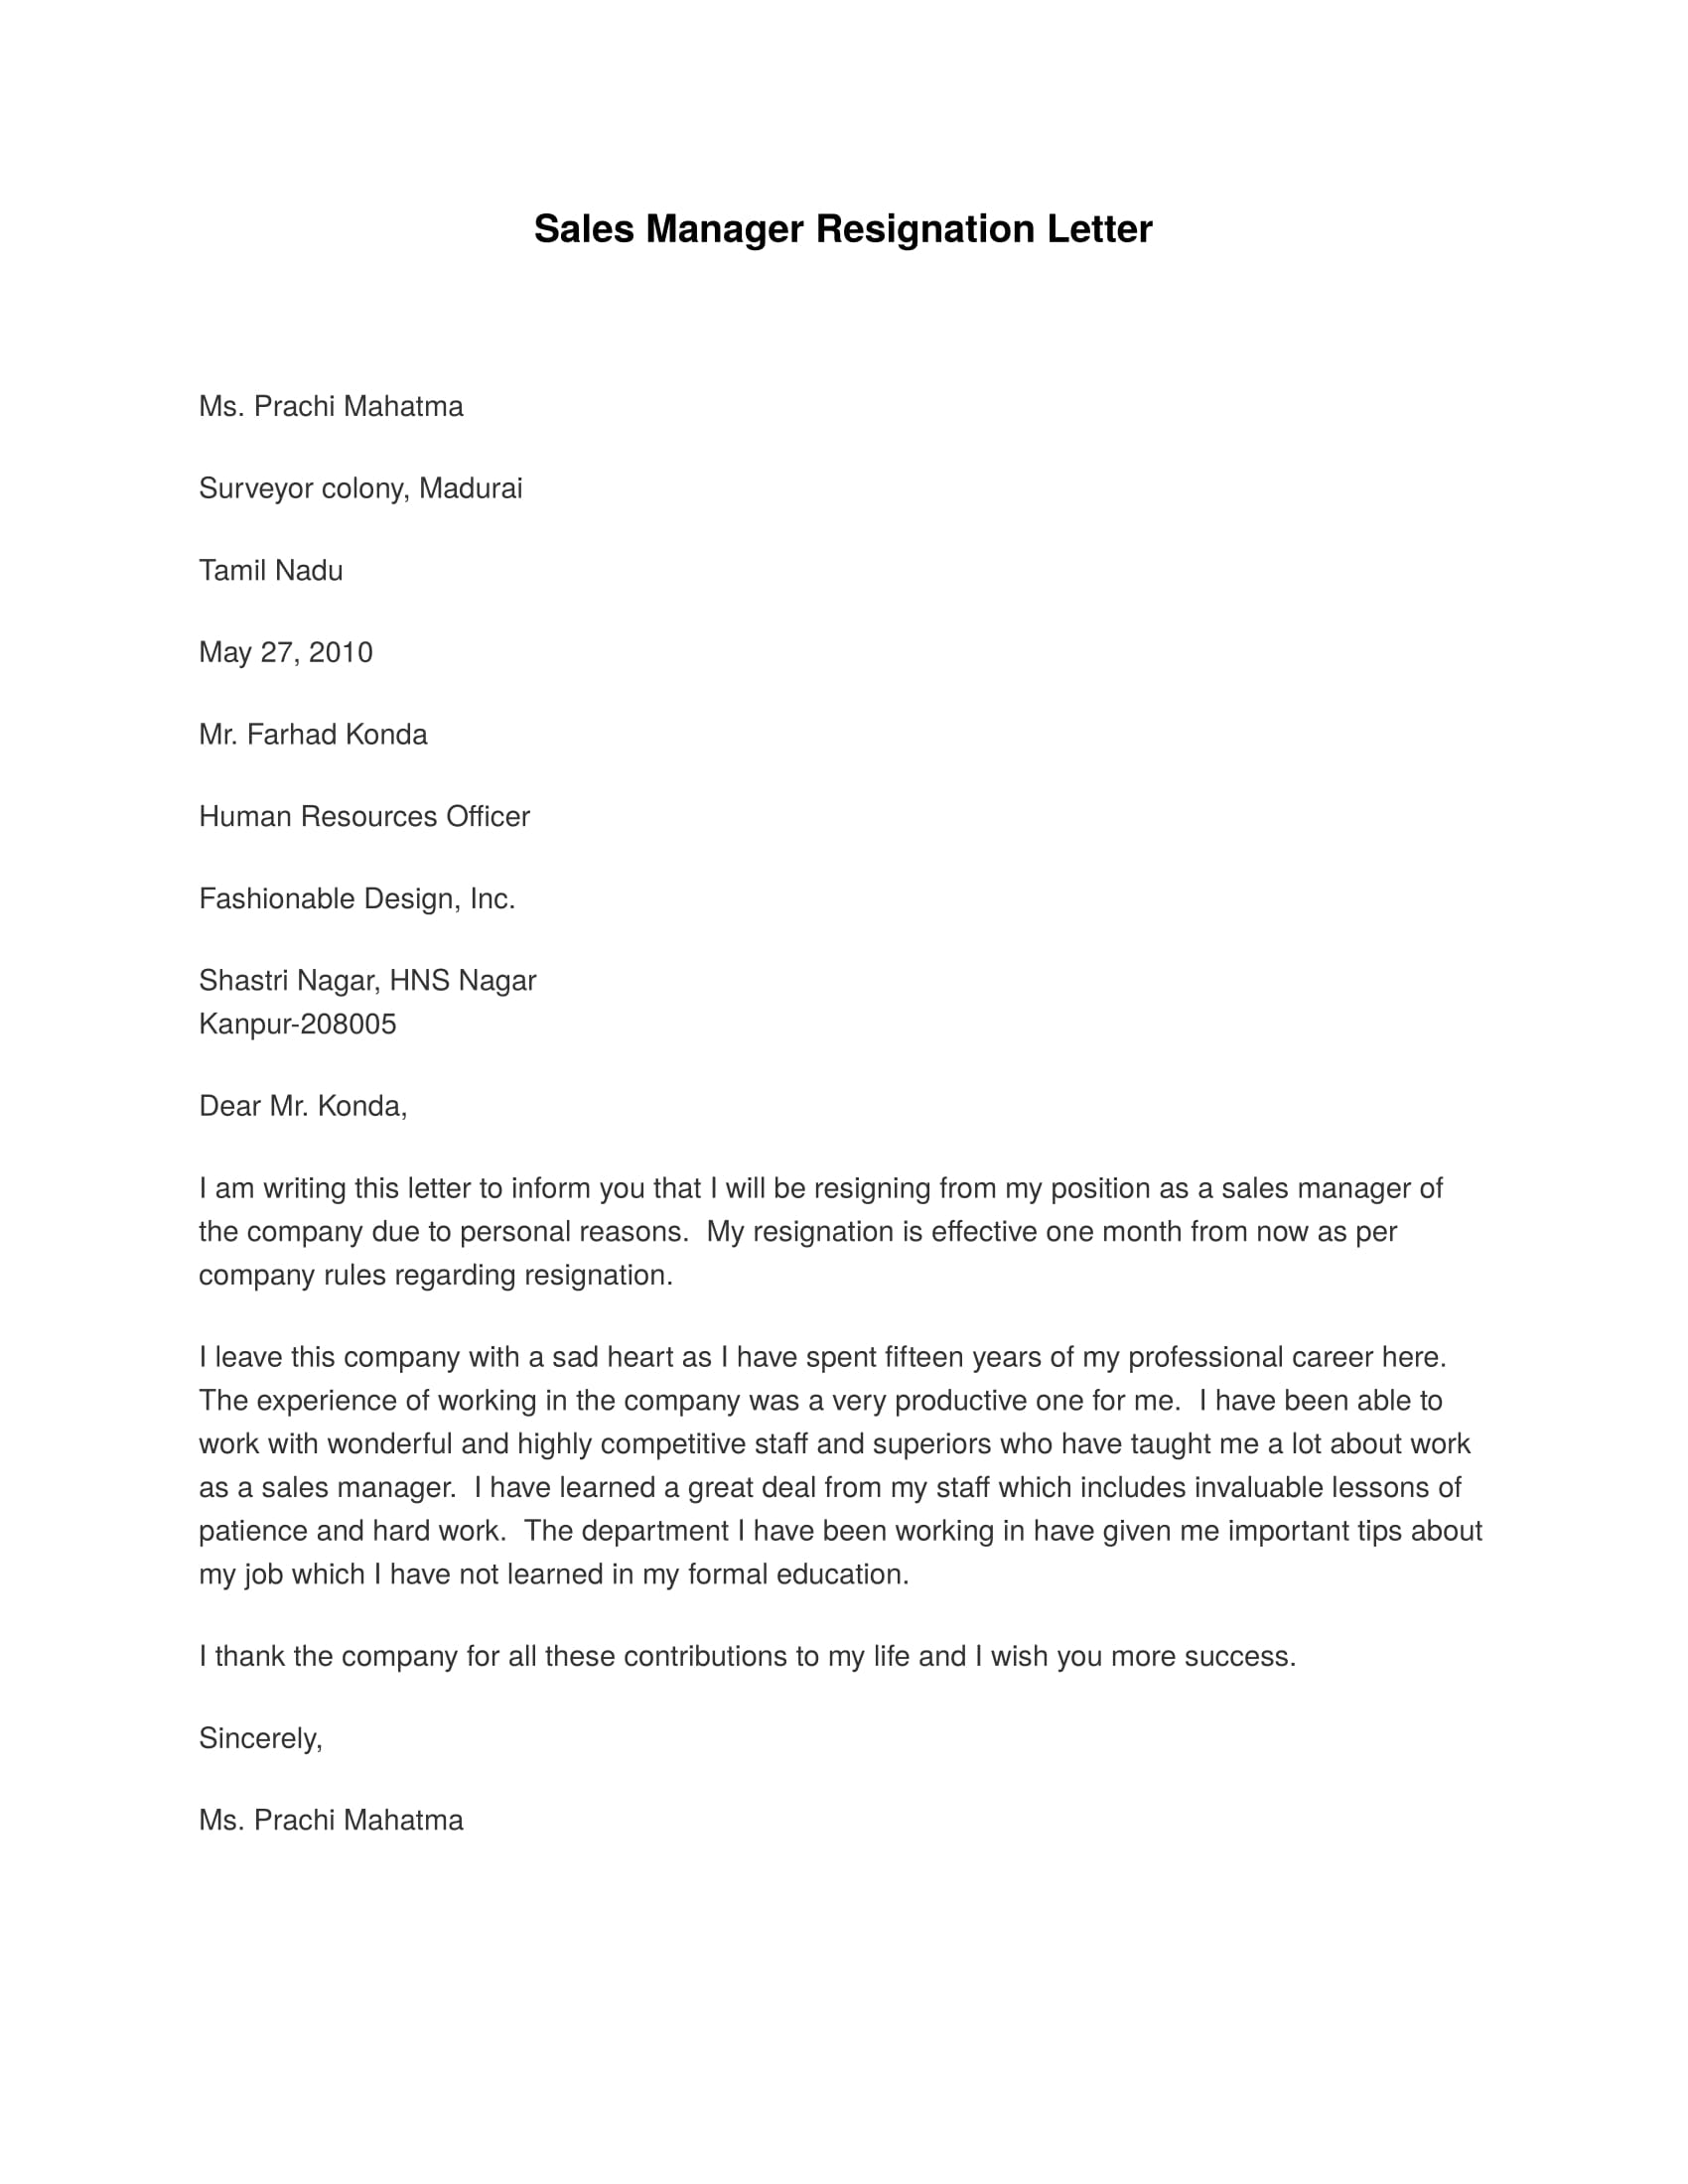 sales manager resignation letter example